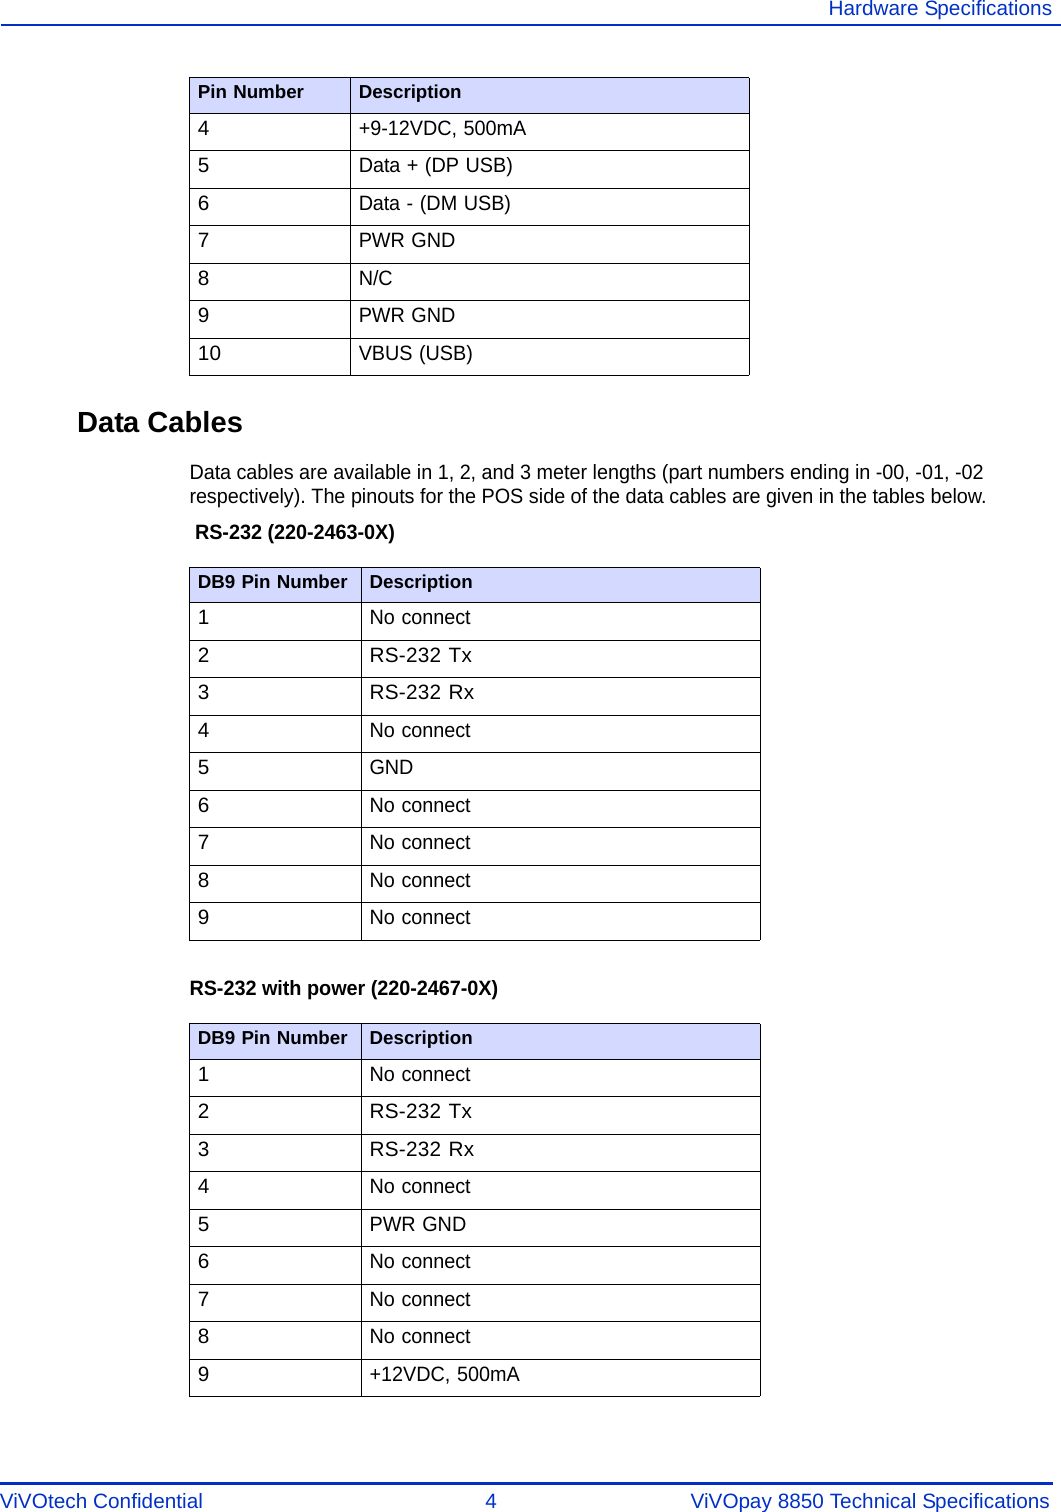 ViVOtech Confidential  4                ViVOpay 8850 Technical SpecificationsHardware SpecificationsData CablesData cables are available in 1, 2, and 3 meter lengths (part numbers ending in -00, -01, -02 respectively). The pinouts for the POS side of the data cables are given in the tables below. RS-232 (220-2463-0X)RS-232 with power (220-2467-0X) 4+9-12VDC, 500mA5Data + (DP USB)6Data - (DM USB)7PWR GND8N/C9PWR GND10VBUS (USB)DB9 Pin Number Description1No connect2 RS-232 Tx3 RS-232 Rx4No connect5GND6No connect7No connect8No connect9No connectDB9 Pin Number Description1No connect2 RS-232 Tx3 RS-232 Rx4No connect5PWR GND6No connect7No connect8No connect9+12VDC, 500mAPin Number Description